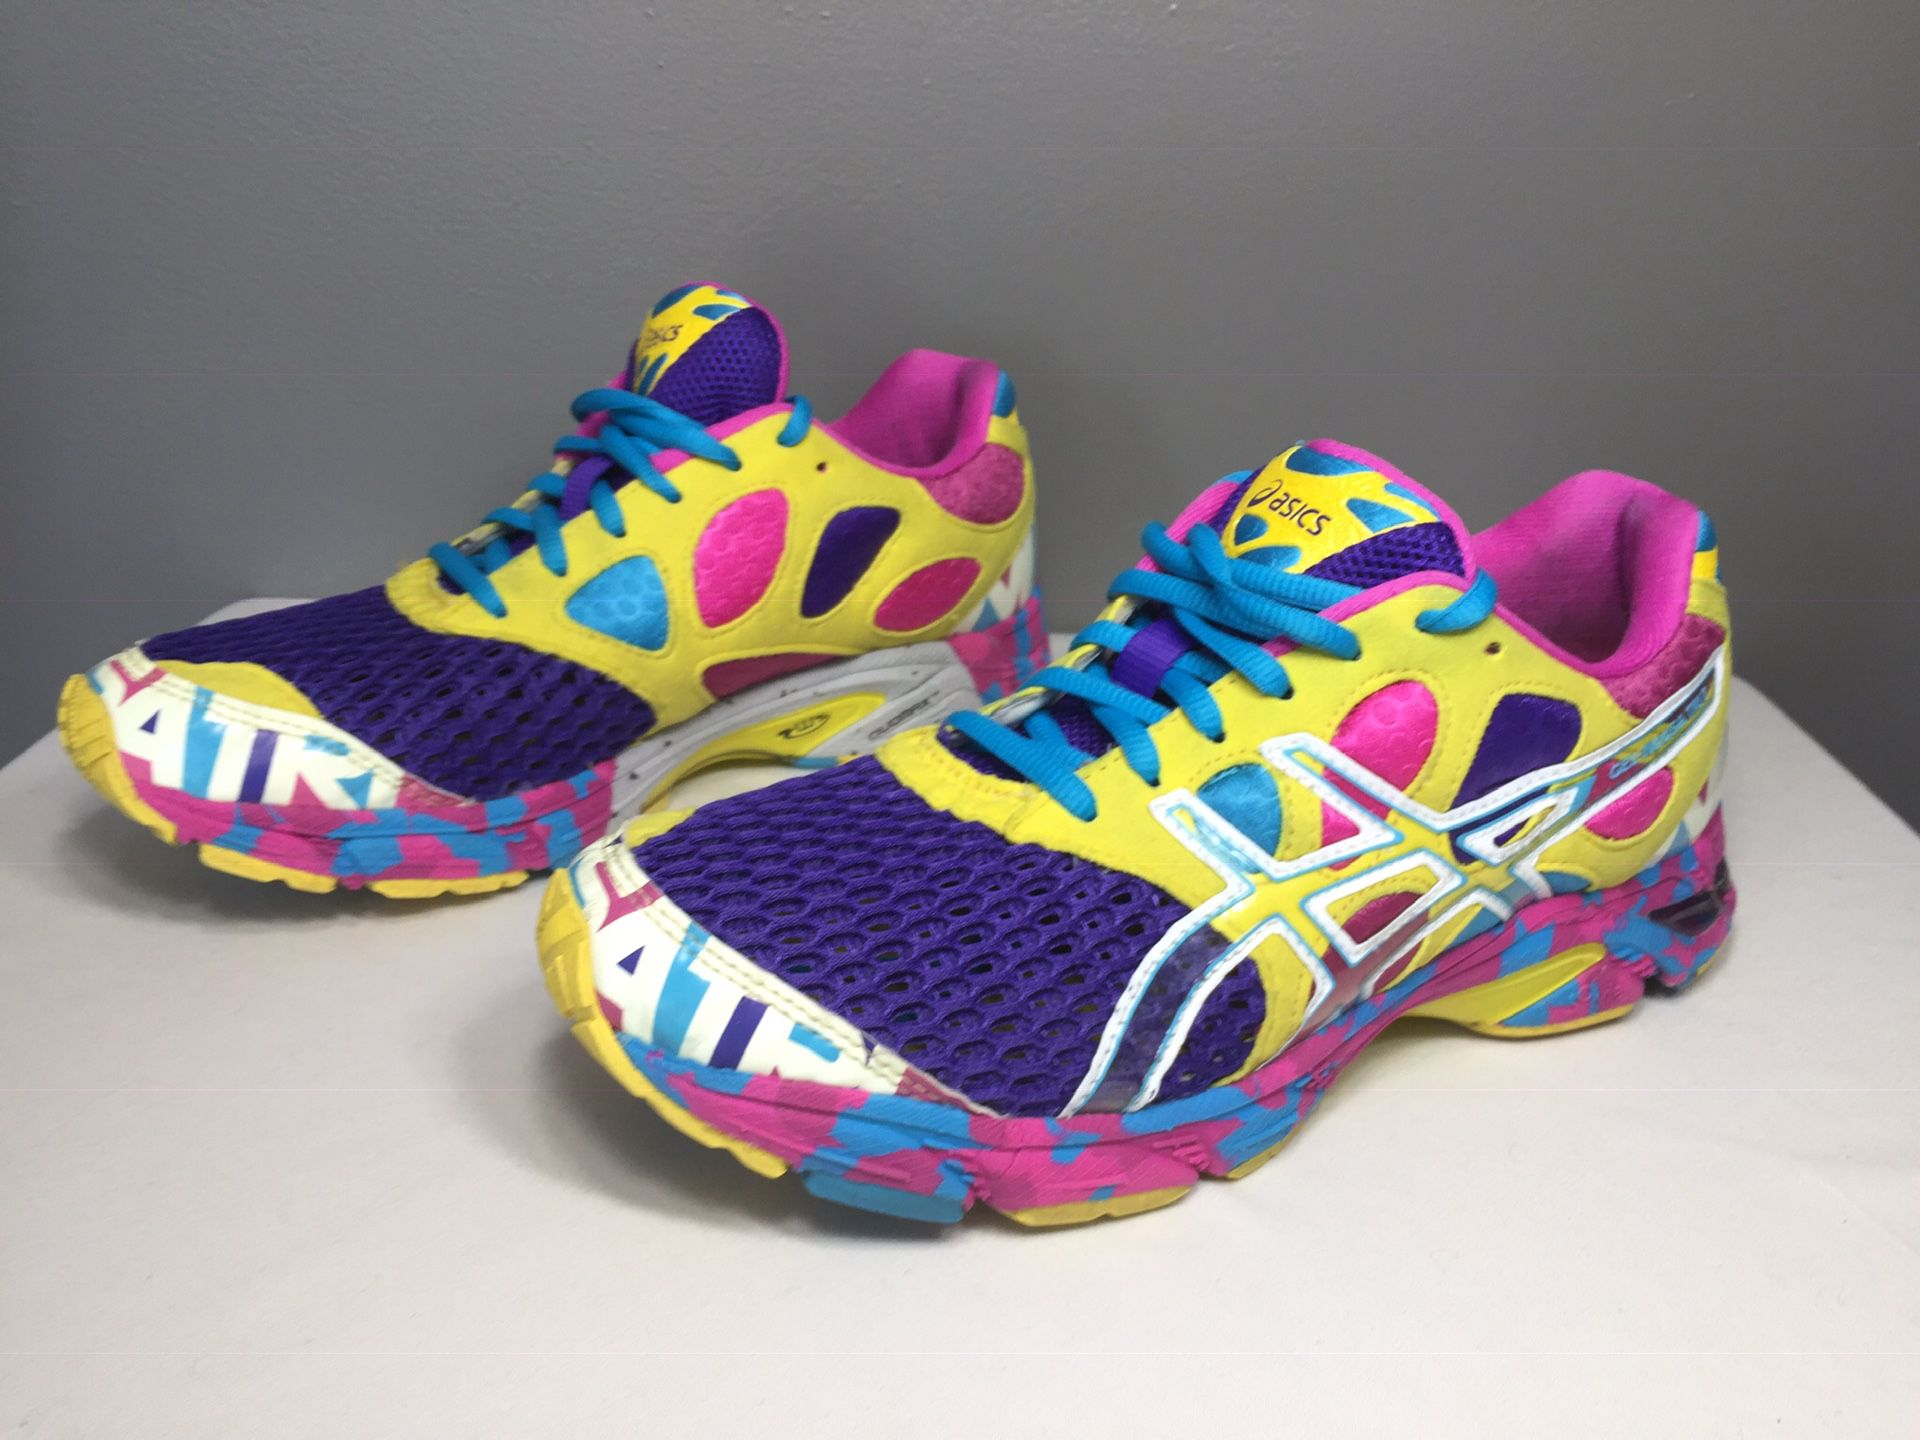 asics gel noosa tri 7 Running shoes for Sale in Indianapolis, IN - OfferUp